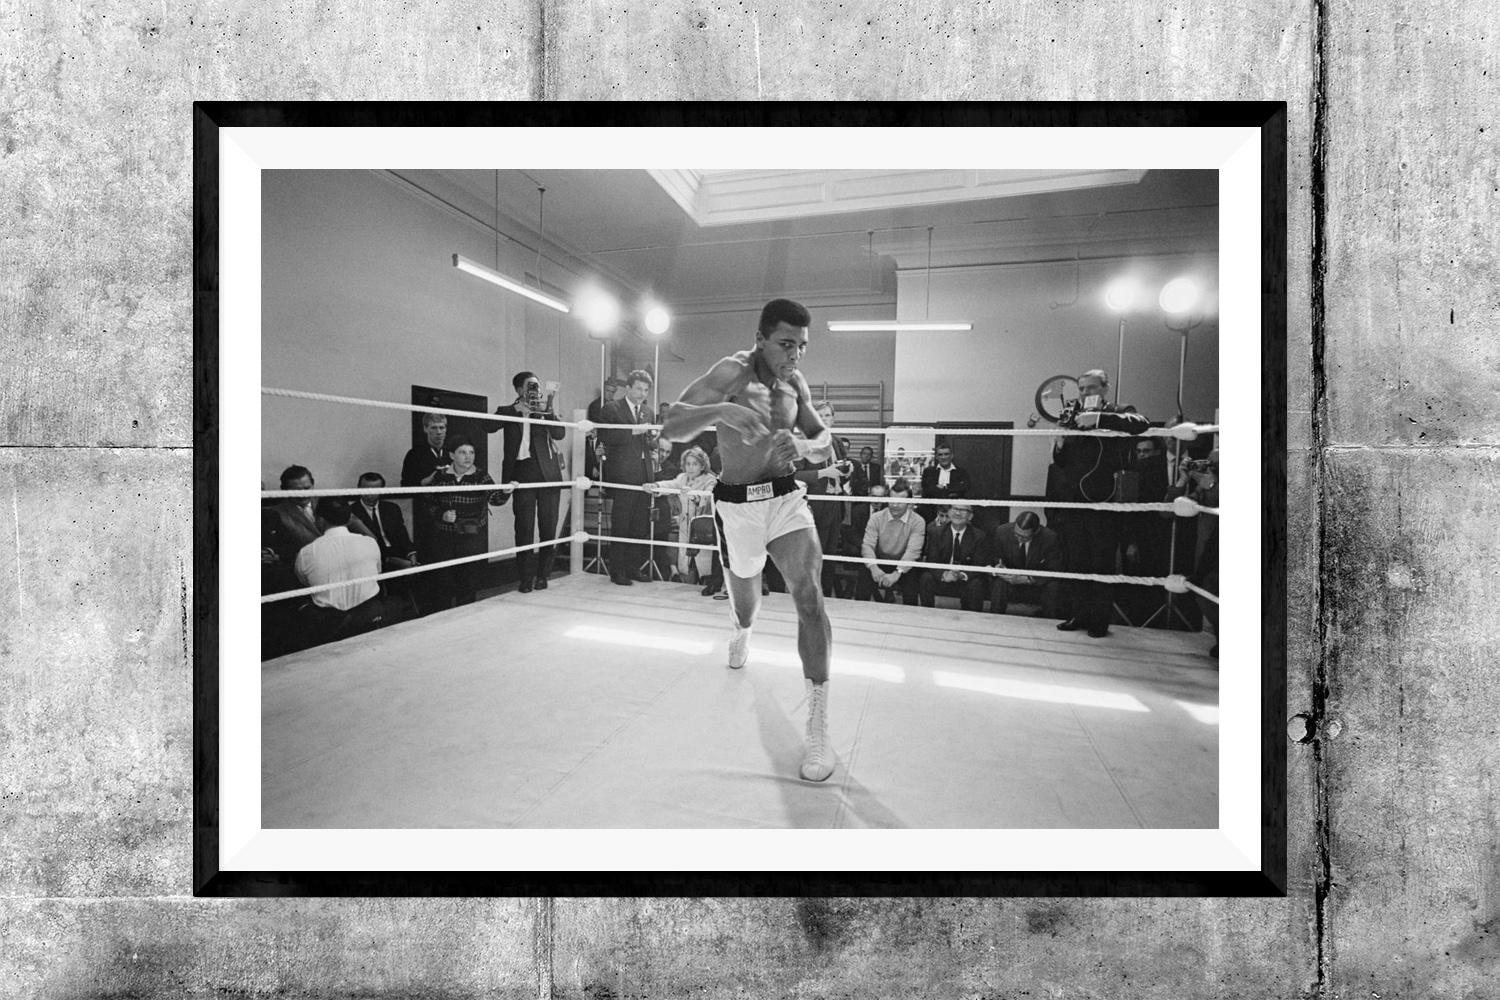 'Ali in Training' by R. McPhedran, Limited Edition Photograph Print, 20x24 - Gray Black and White Photograph by Unknown